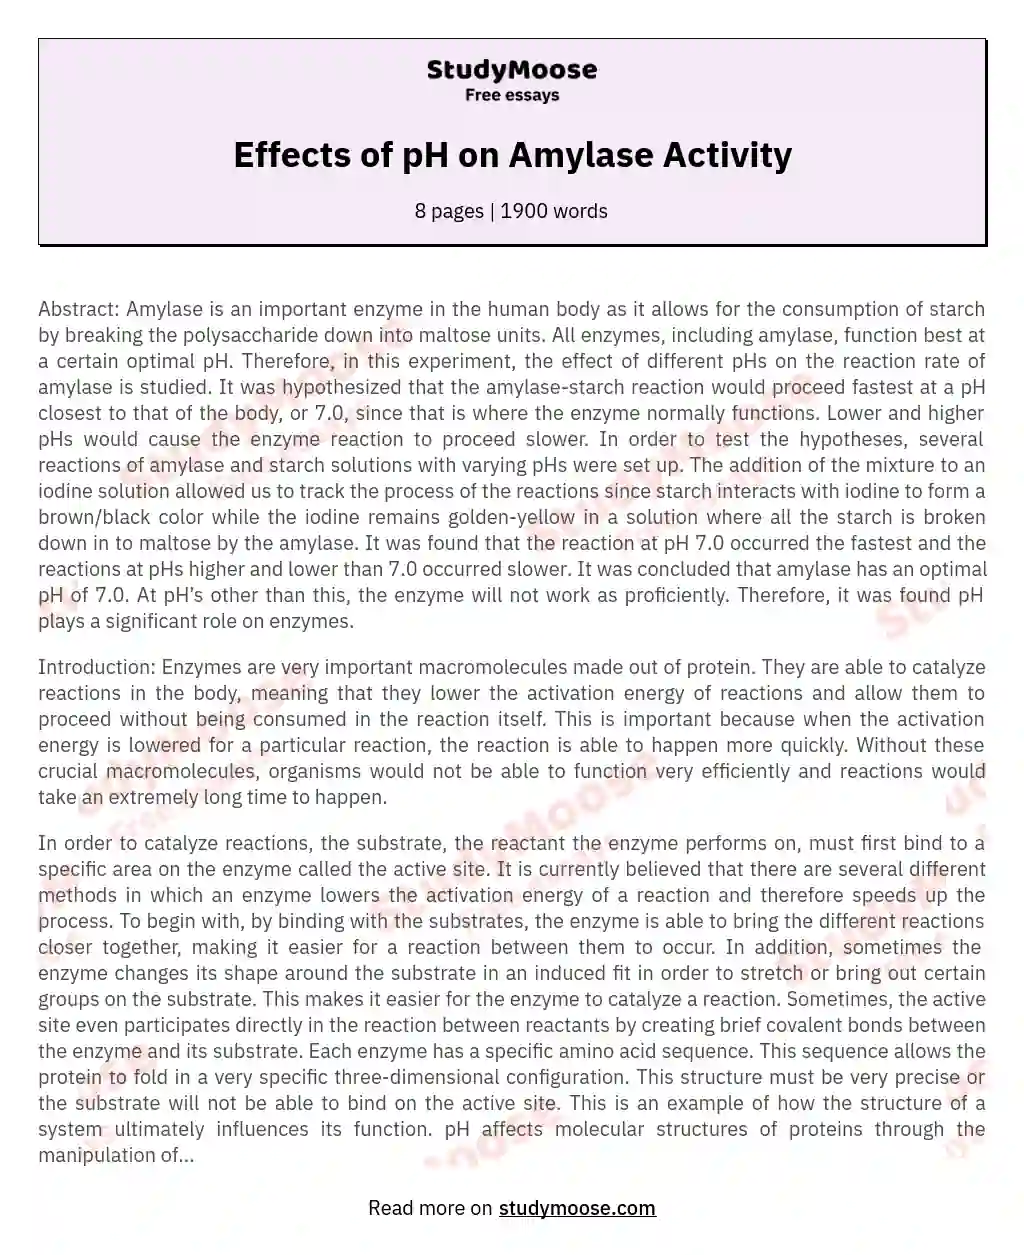 Effects of pH on Amylase Activity essay